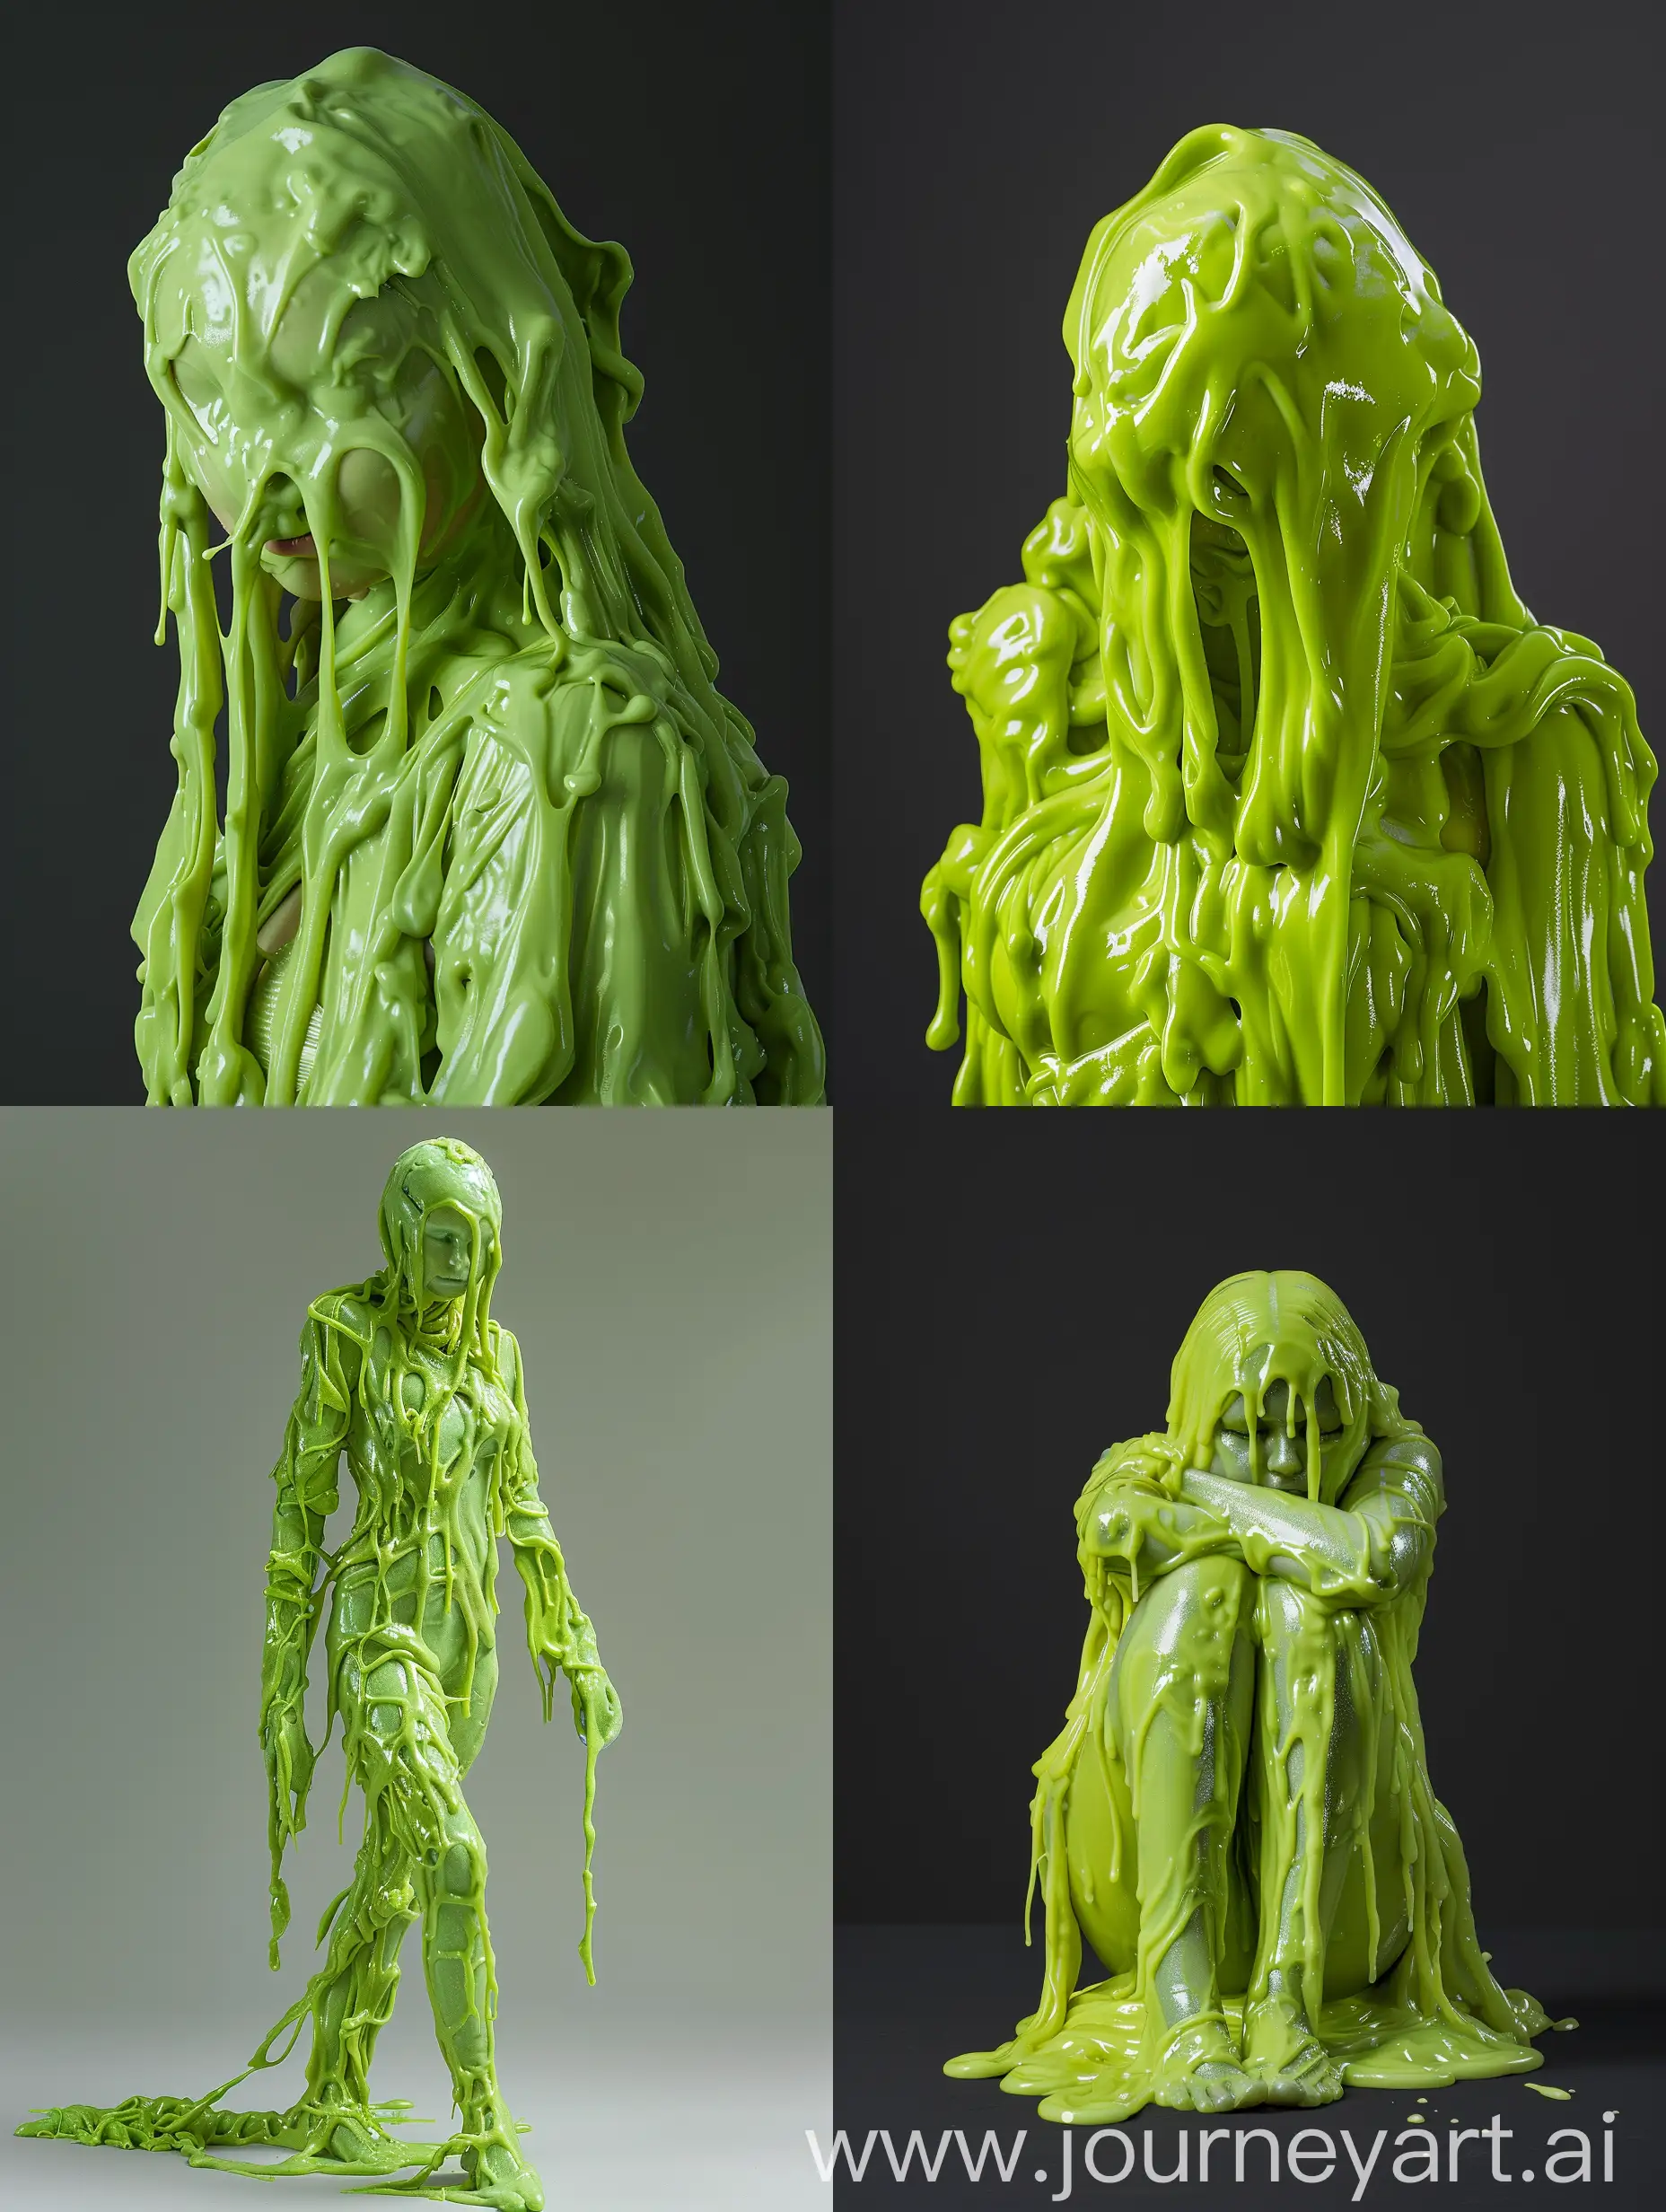 Ultra-realistic photo shot on a Sony a7III of
A lime green slimegirl fully made from slime.

Camera photo, detailed, lifelike, detailed, HD, 16K Ultra High-res, Full-length portrait, Full shot, head to toes, wide angle, zoomed out, full figure.